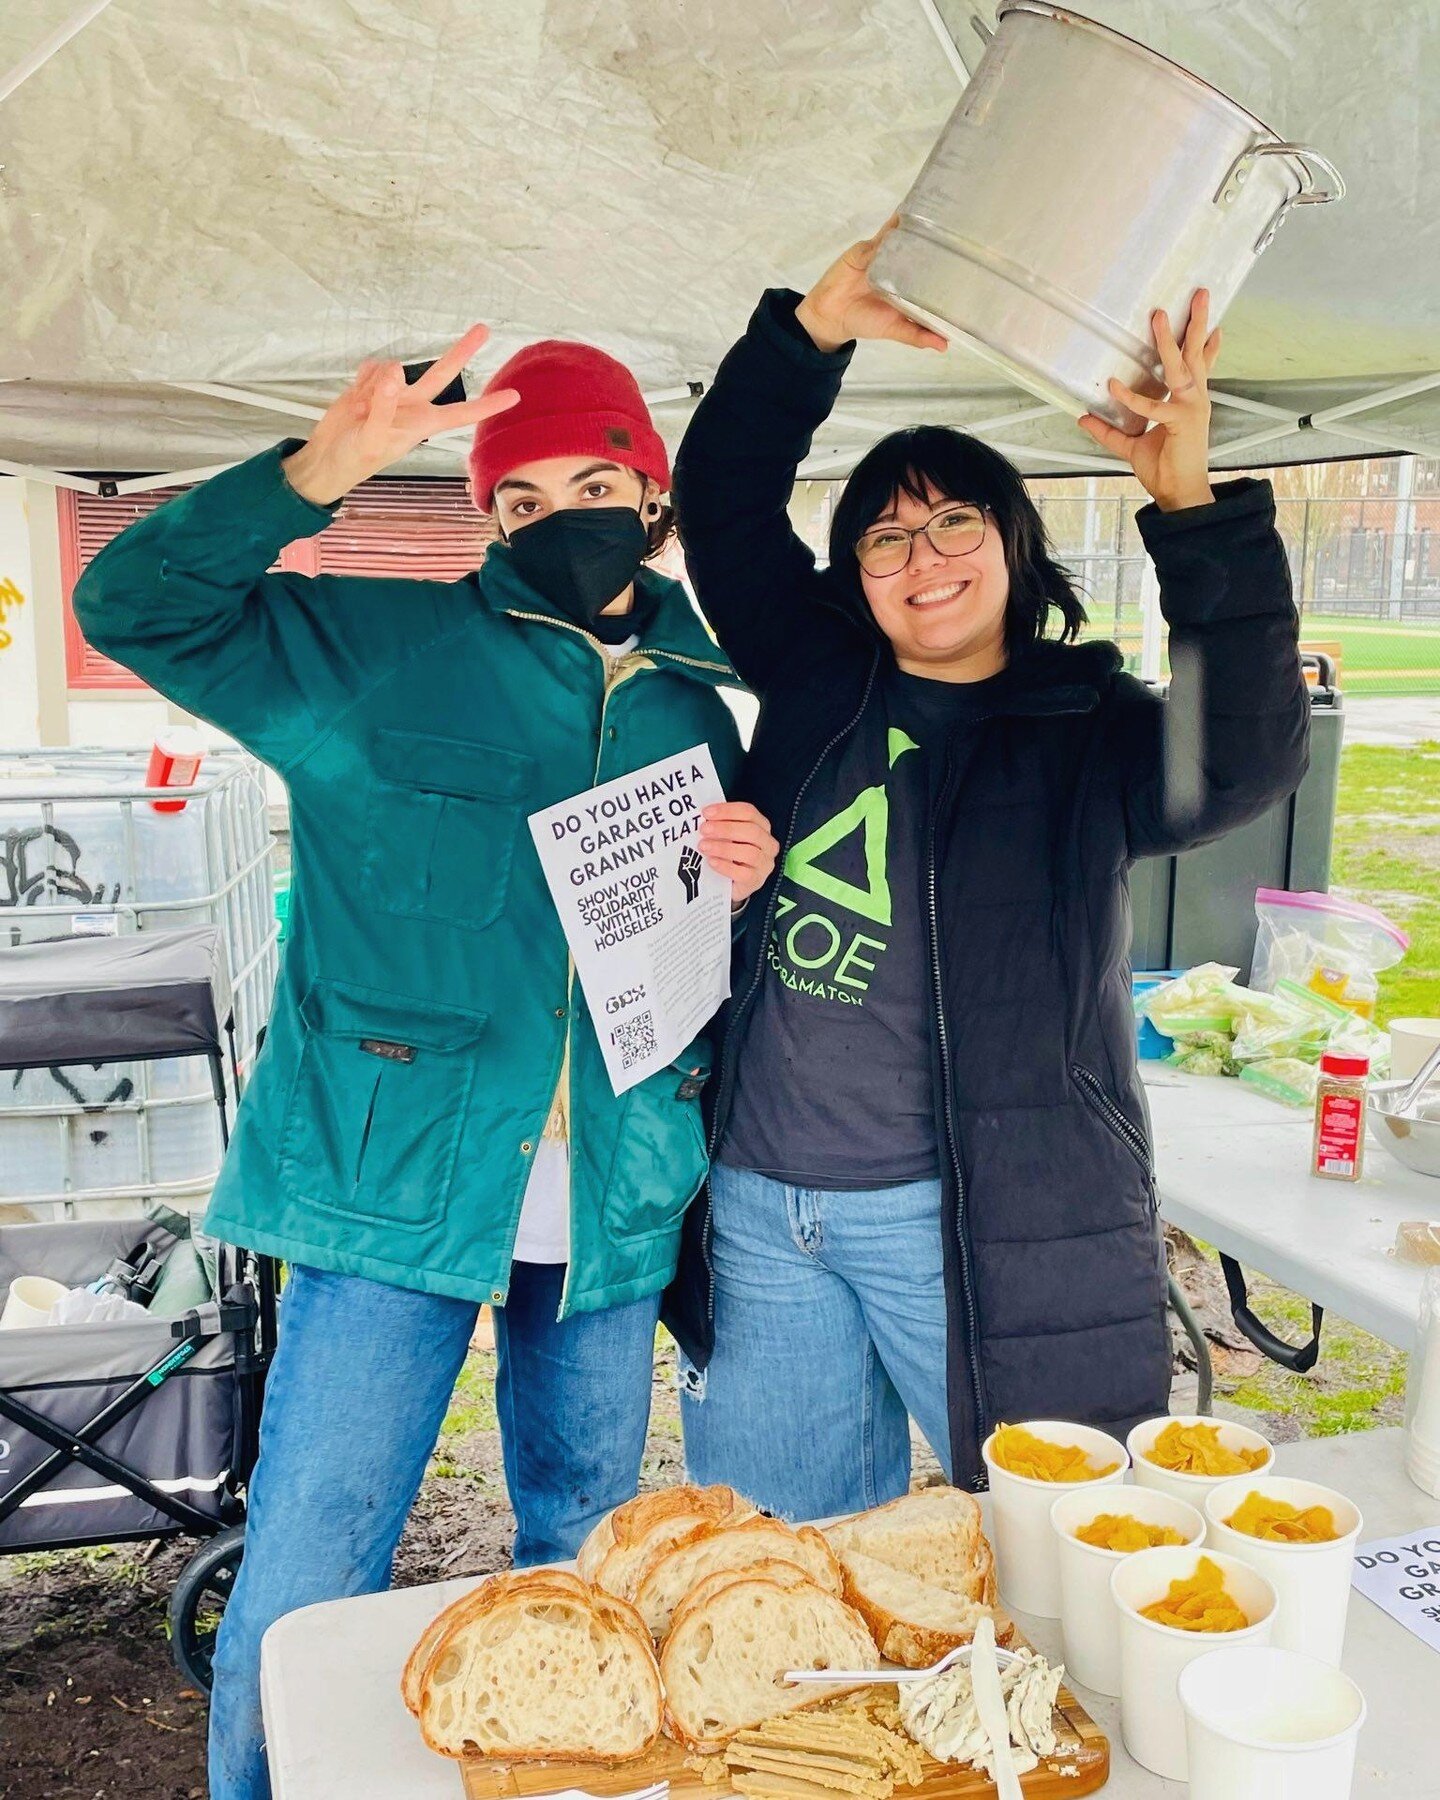 The biggest of thanks to @howdy.alo and the crew @casadelxolo for coming thru with the most soul-warming pozole roja vegana for our mutual aid food distribution at our first stewarding event on April 9th! And for gettin in the dirt with us too 🥰

Ca